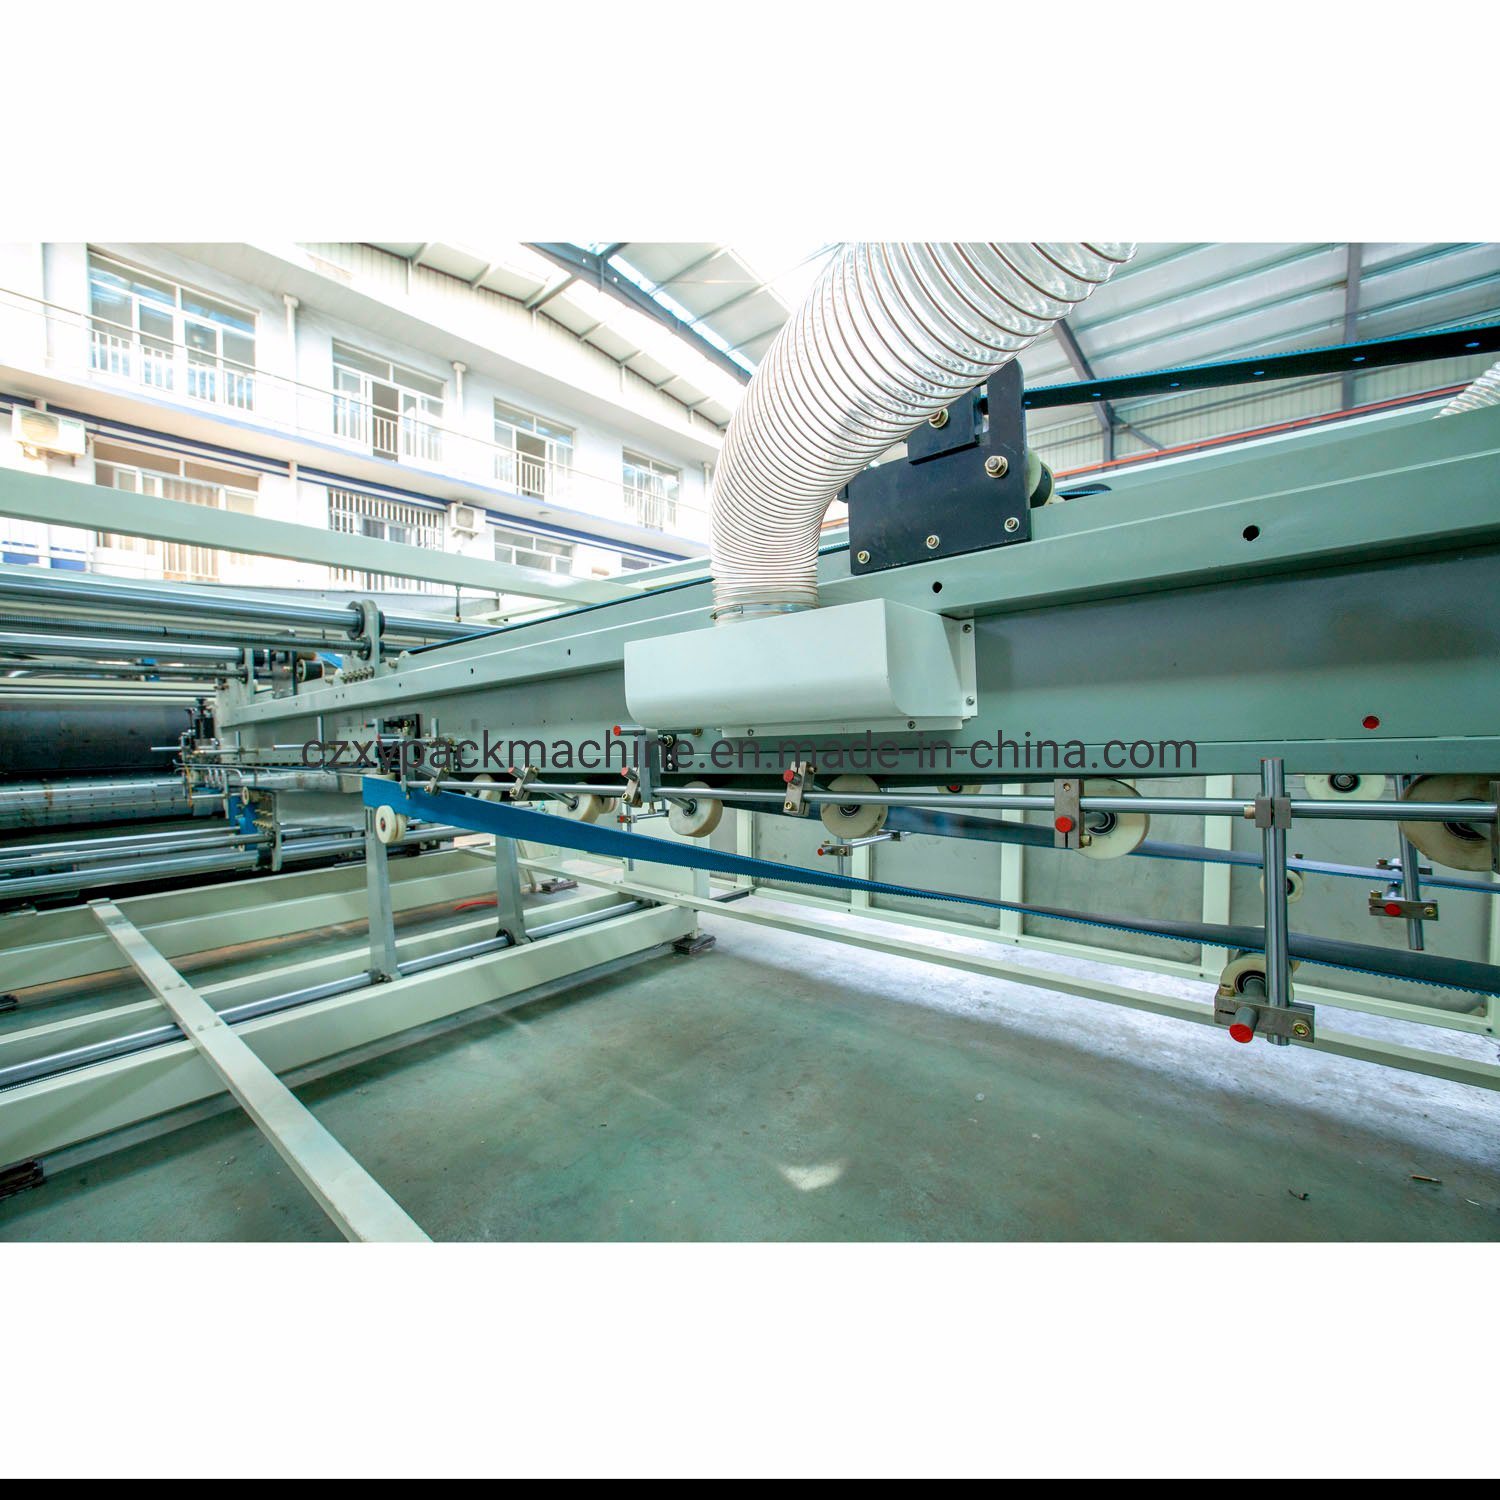 Printing Slotting Die Cutting Folding Gluing Strapping Corrugated Box Making Line